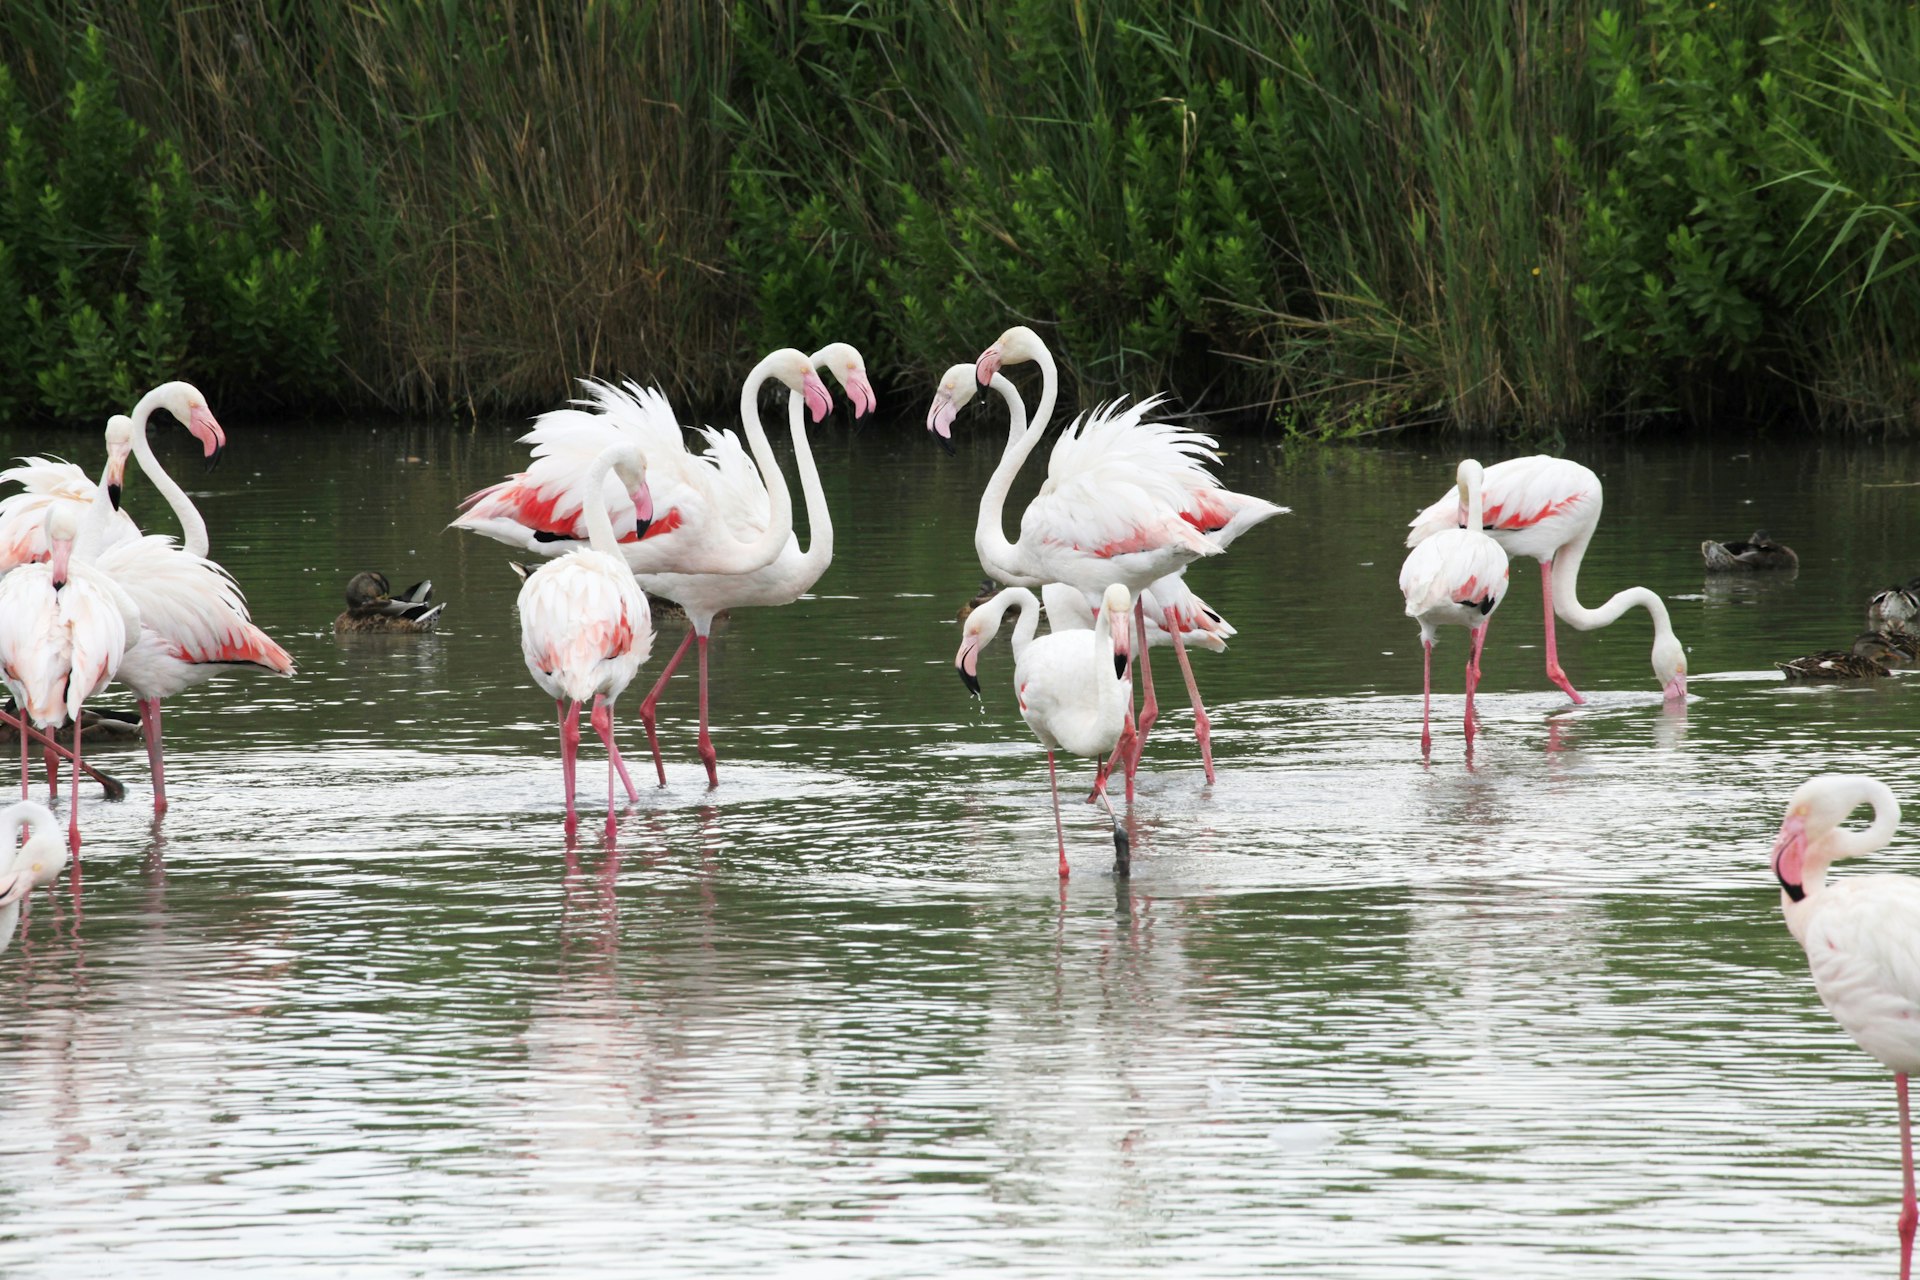 Flamingos on the Camargue, South of France